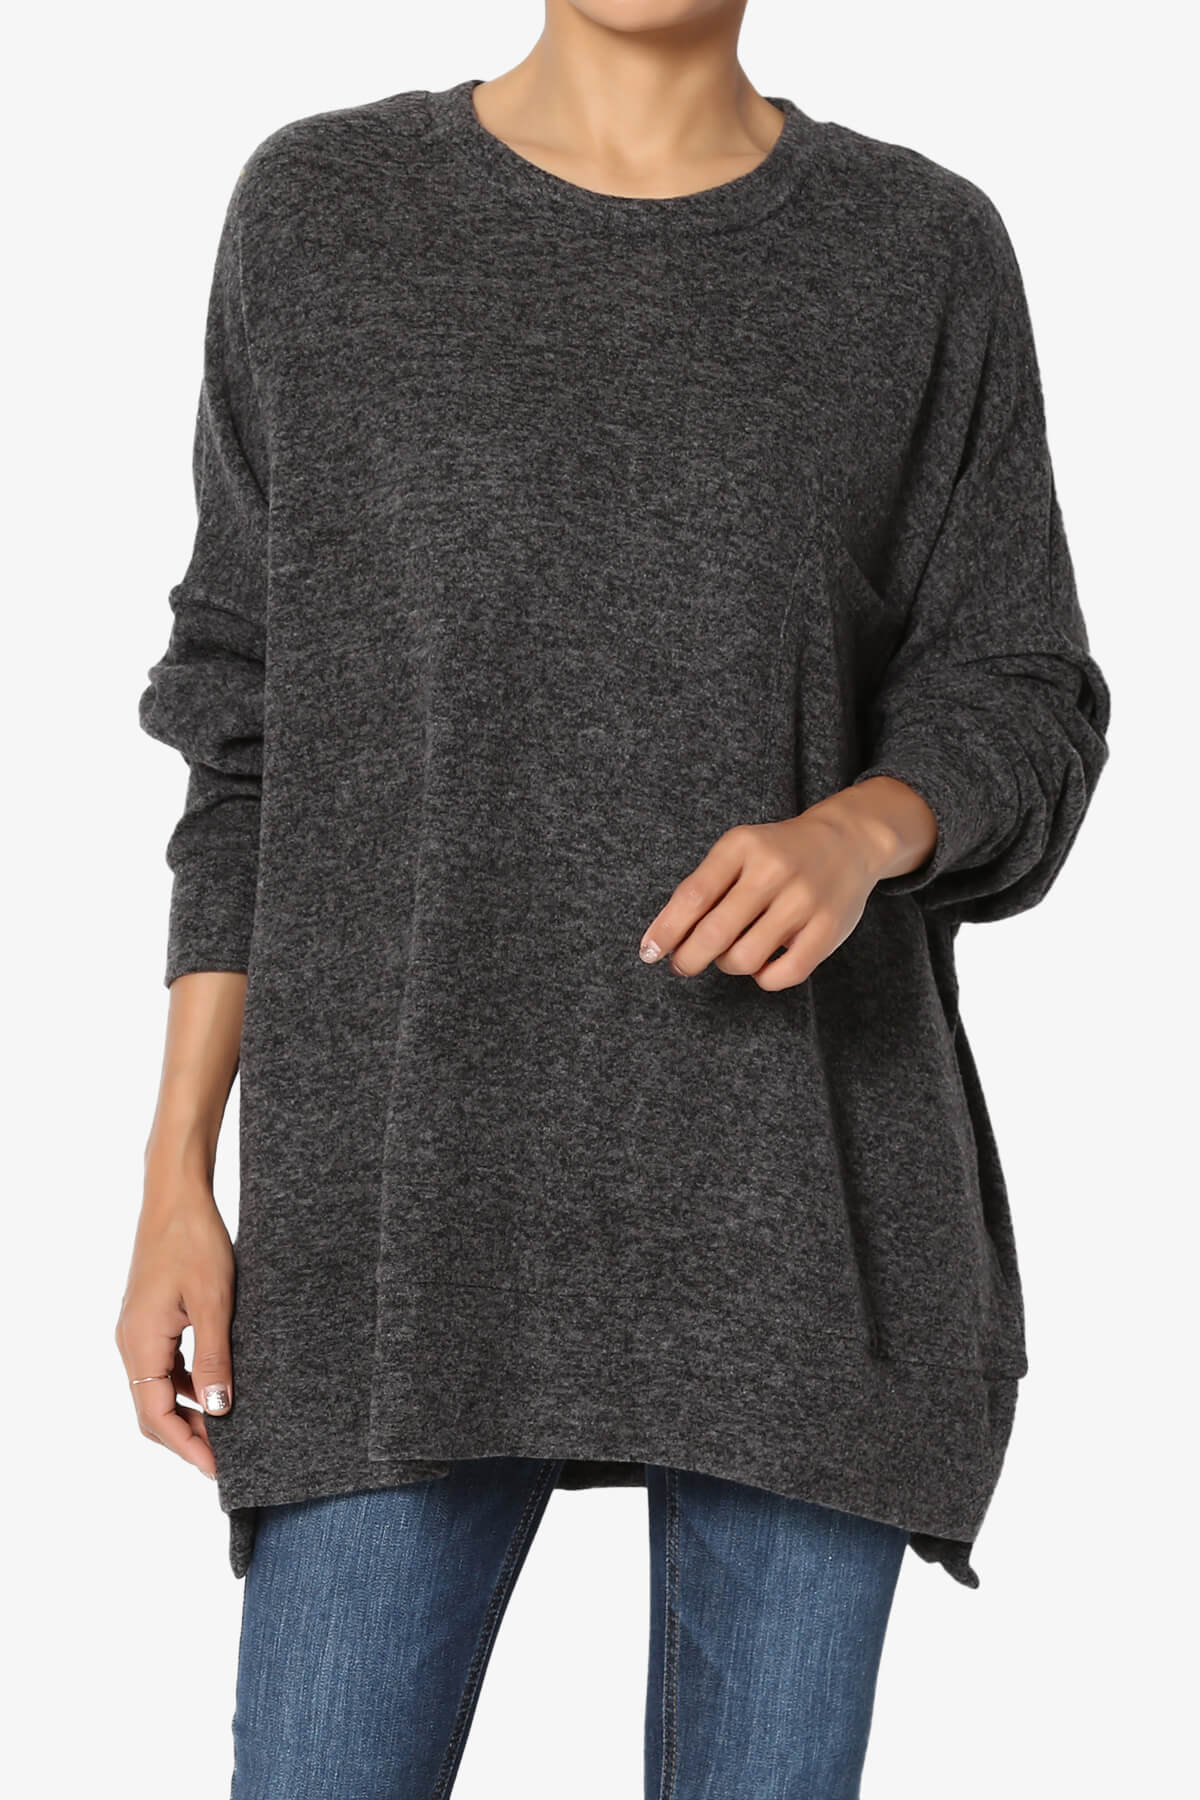 Load image into Gallery viewer, Breccan Blushed Knit Oversized Sweater BLACK_1
